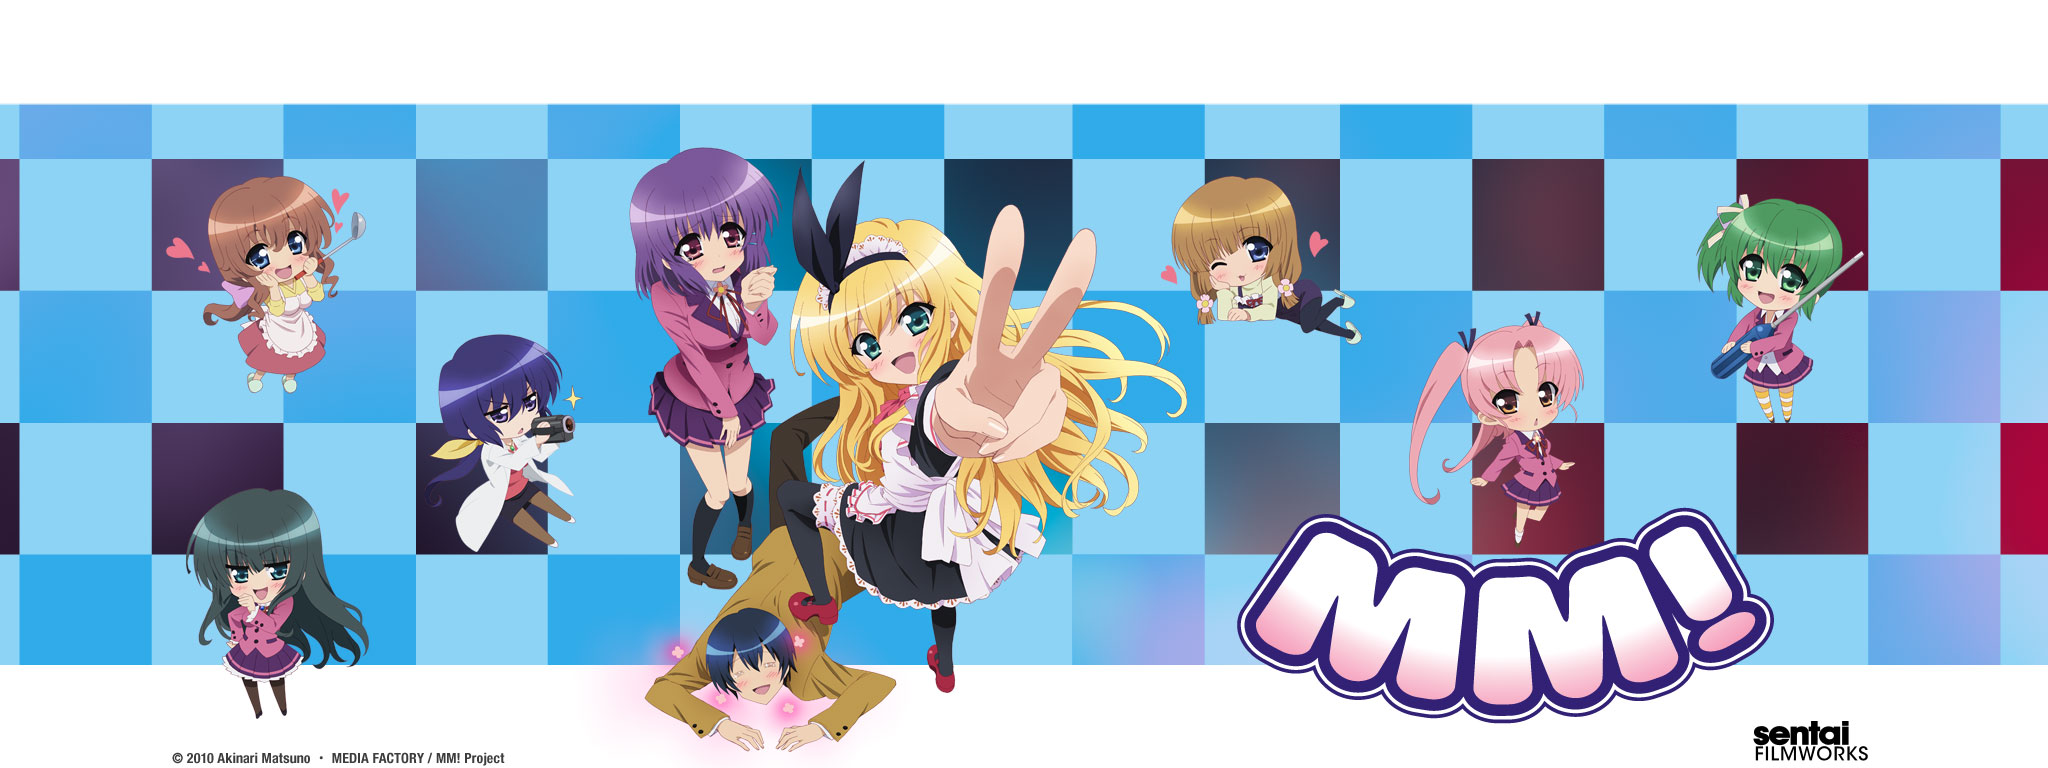 Title Art for MM!